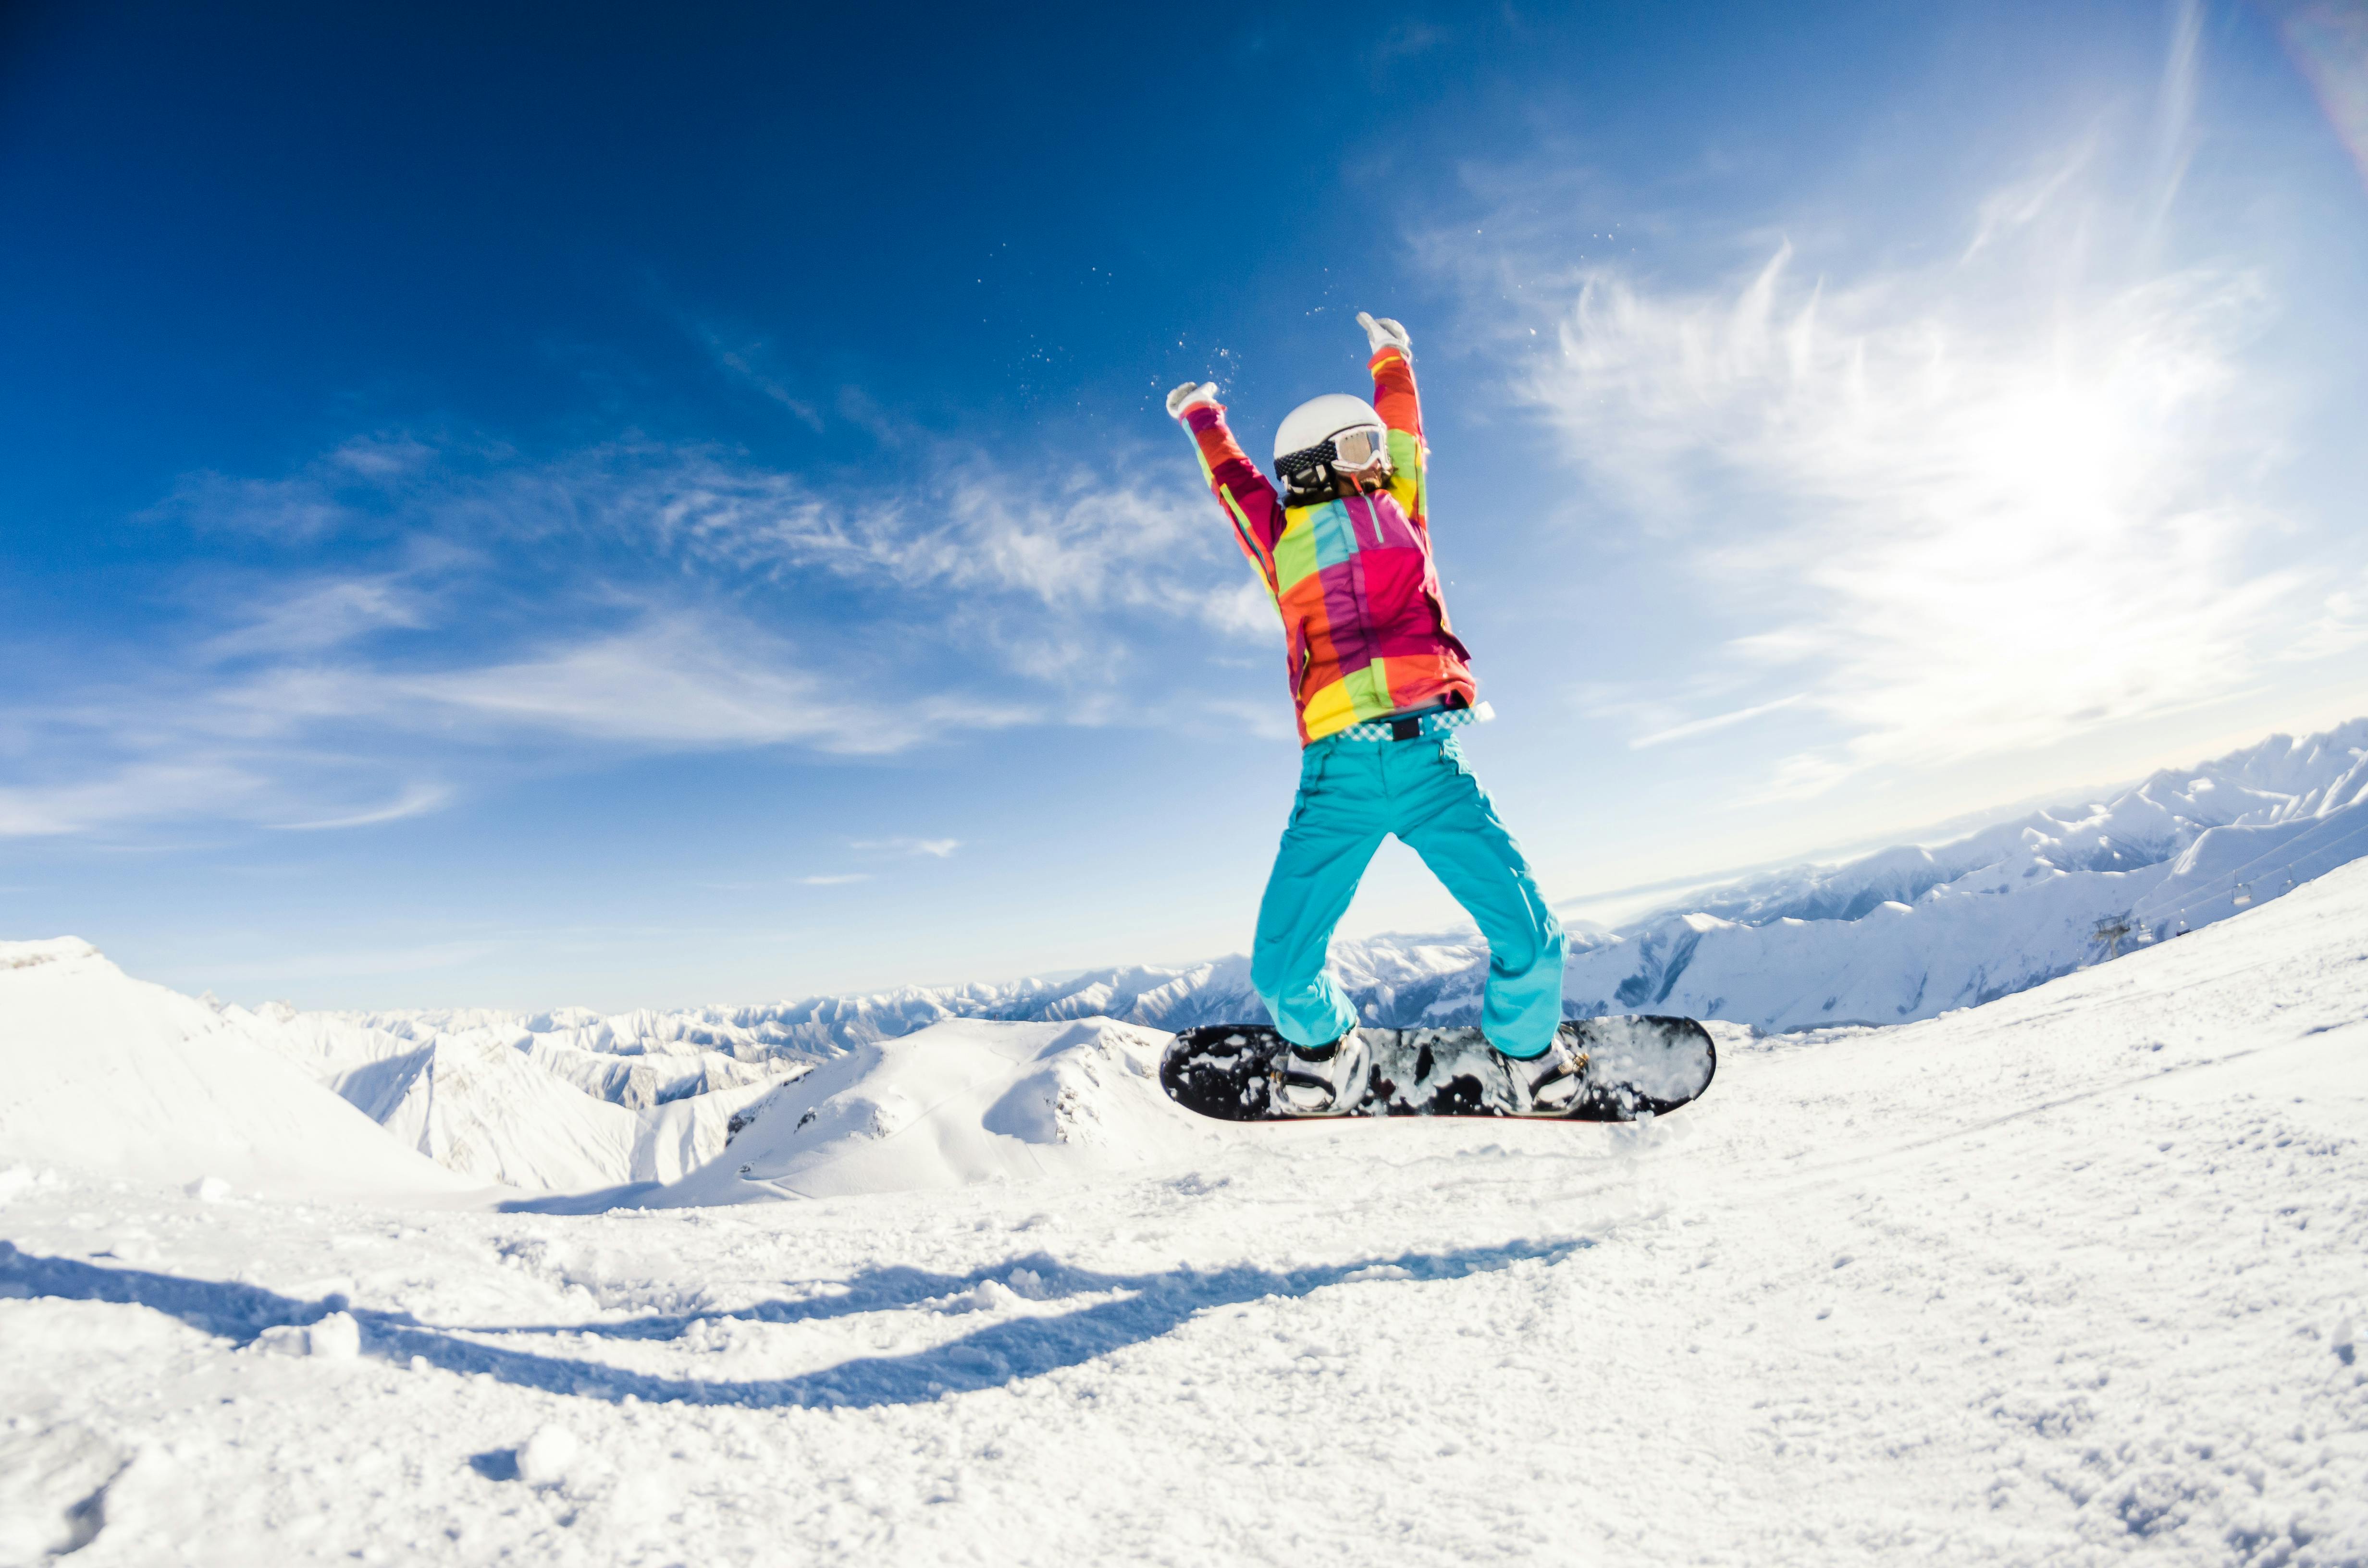 An Expert Guide to What to Wear Skiing and Snowboarding